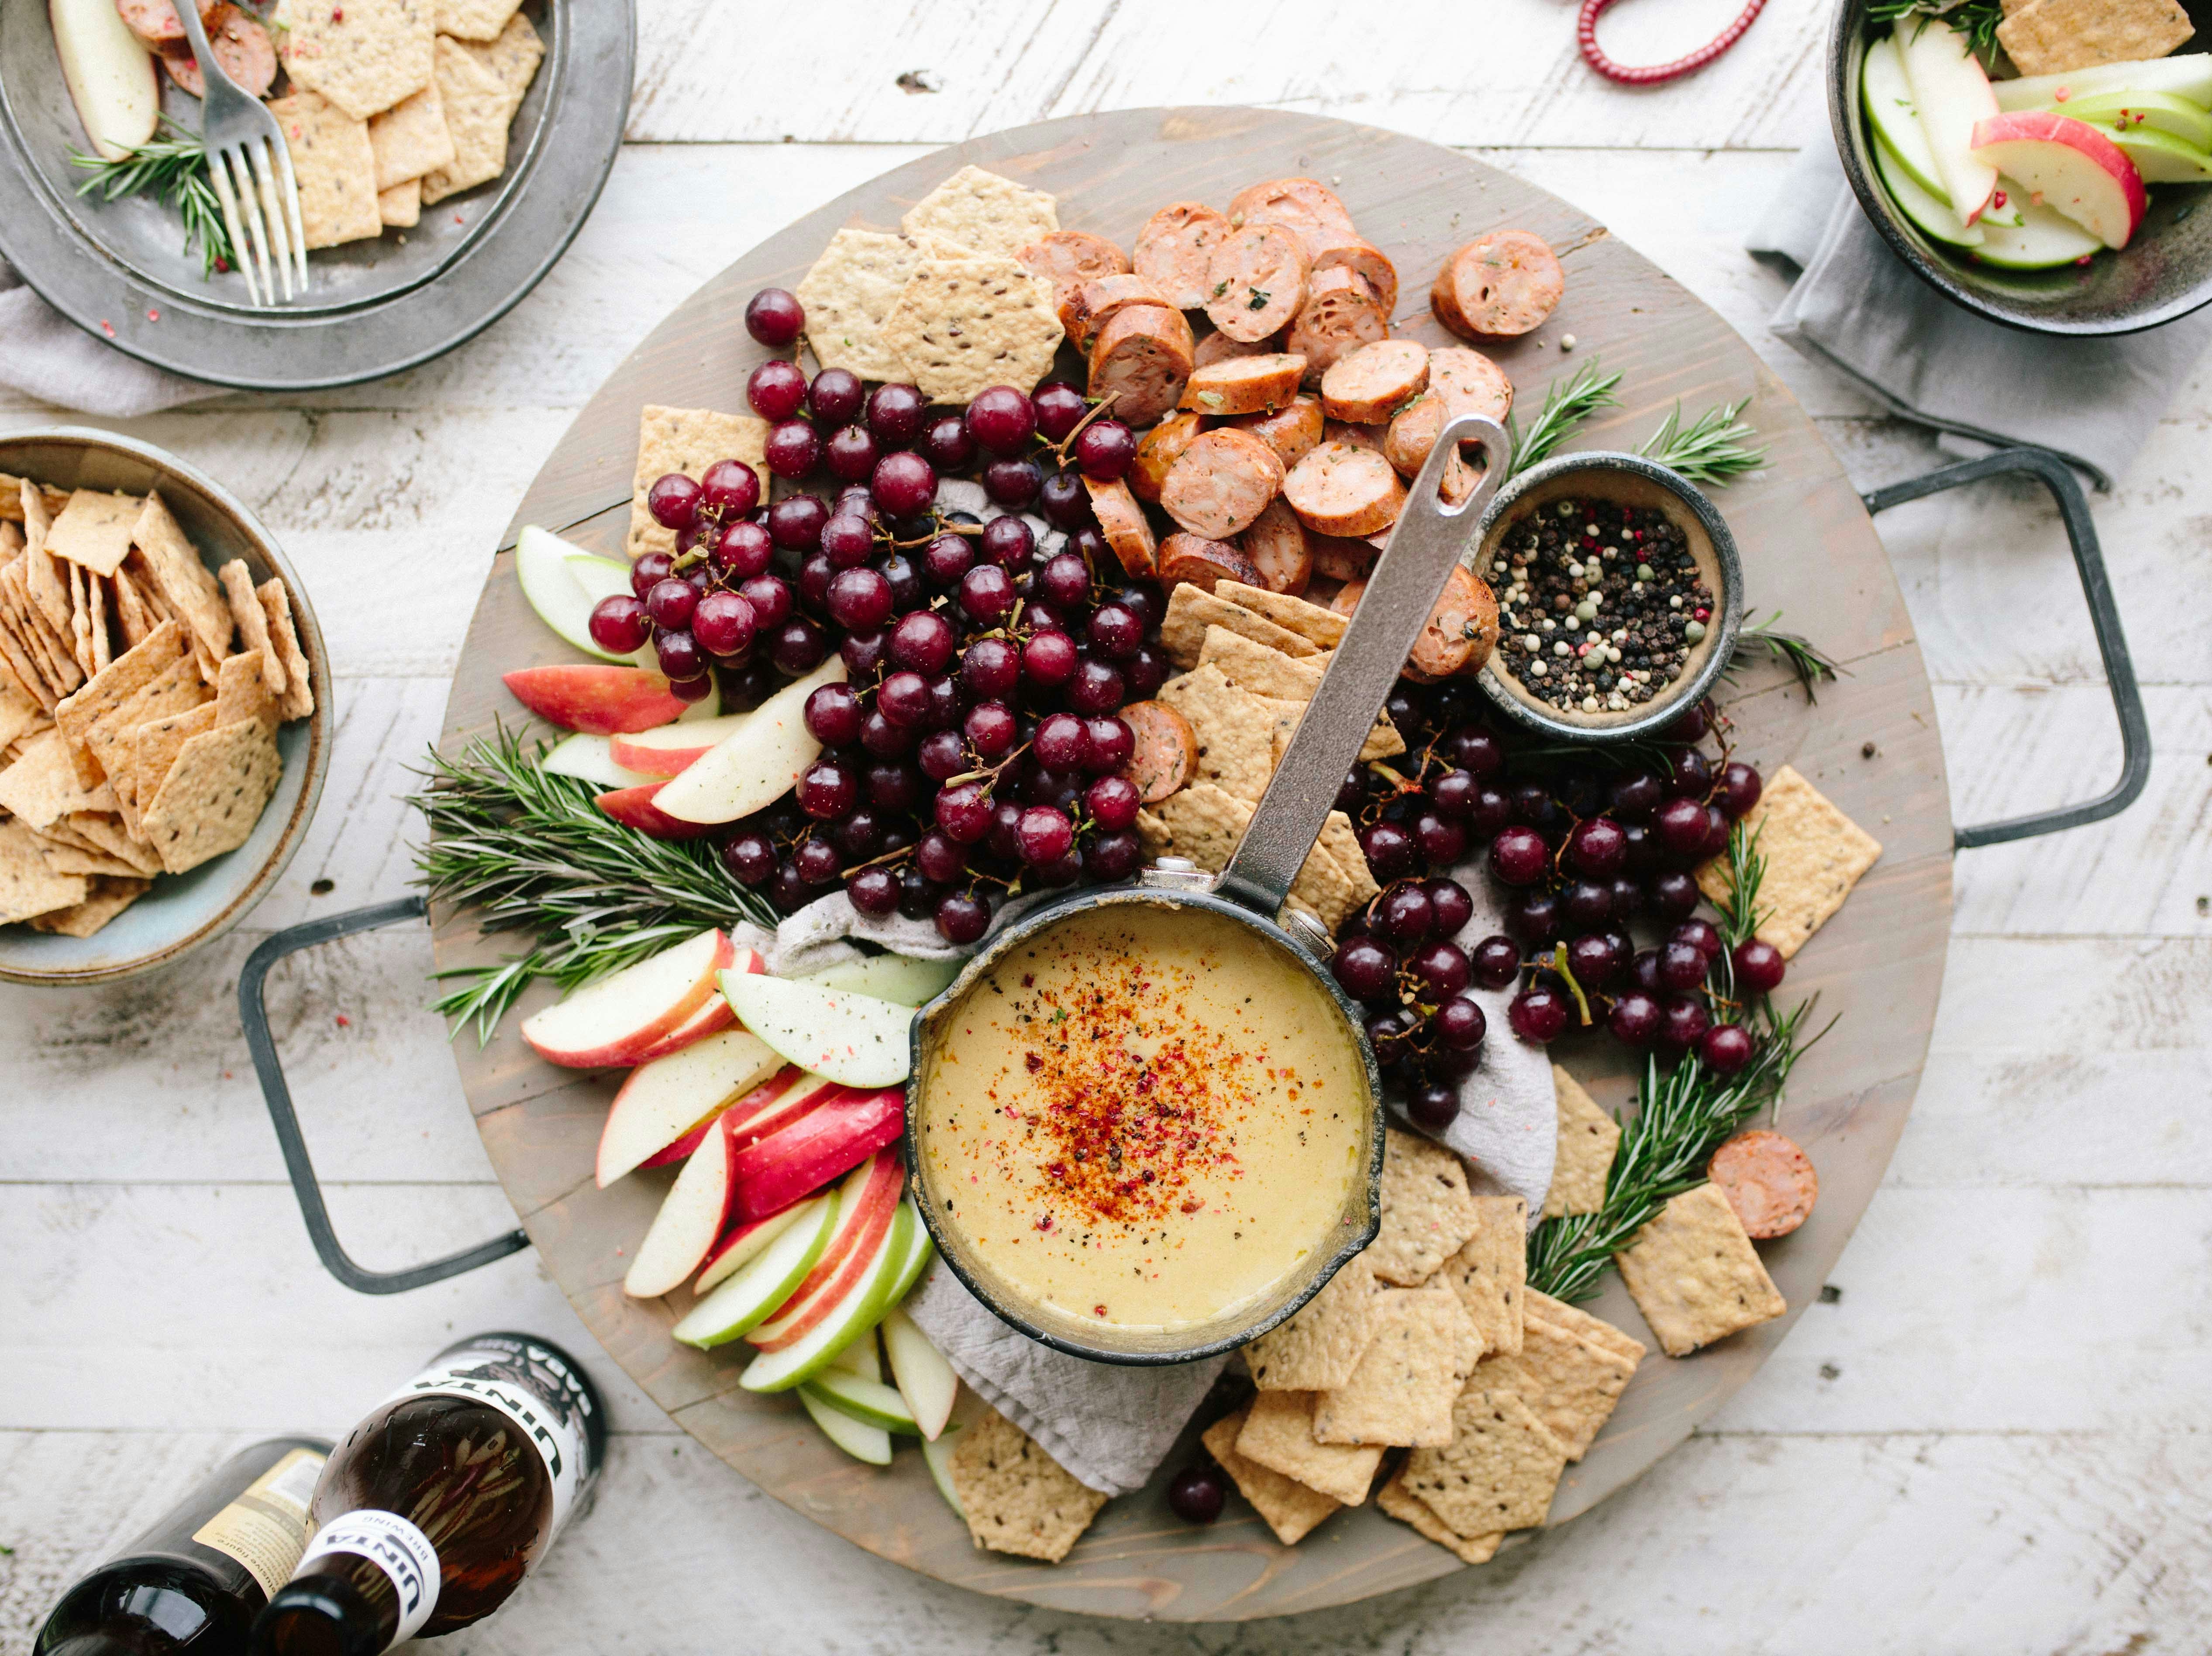 A platter with healthy snacks | Source: Unsplash